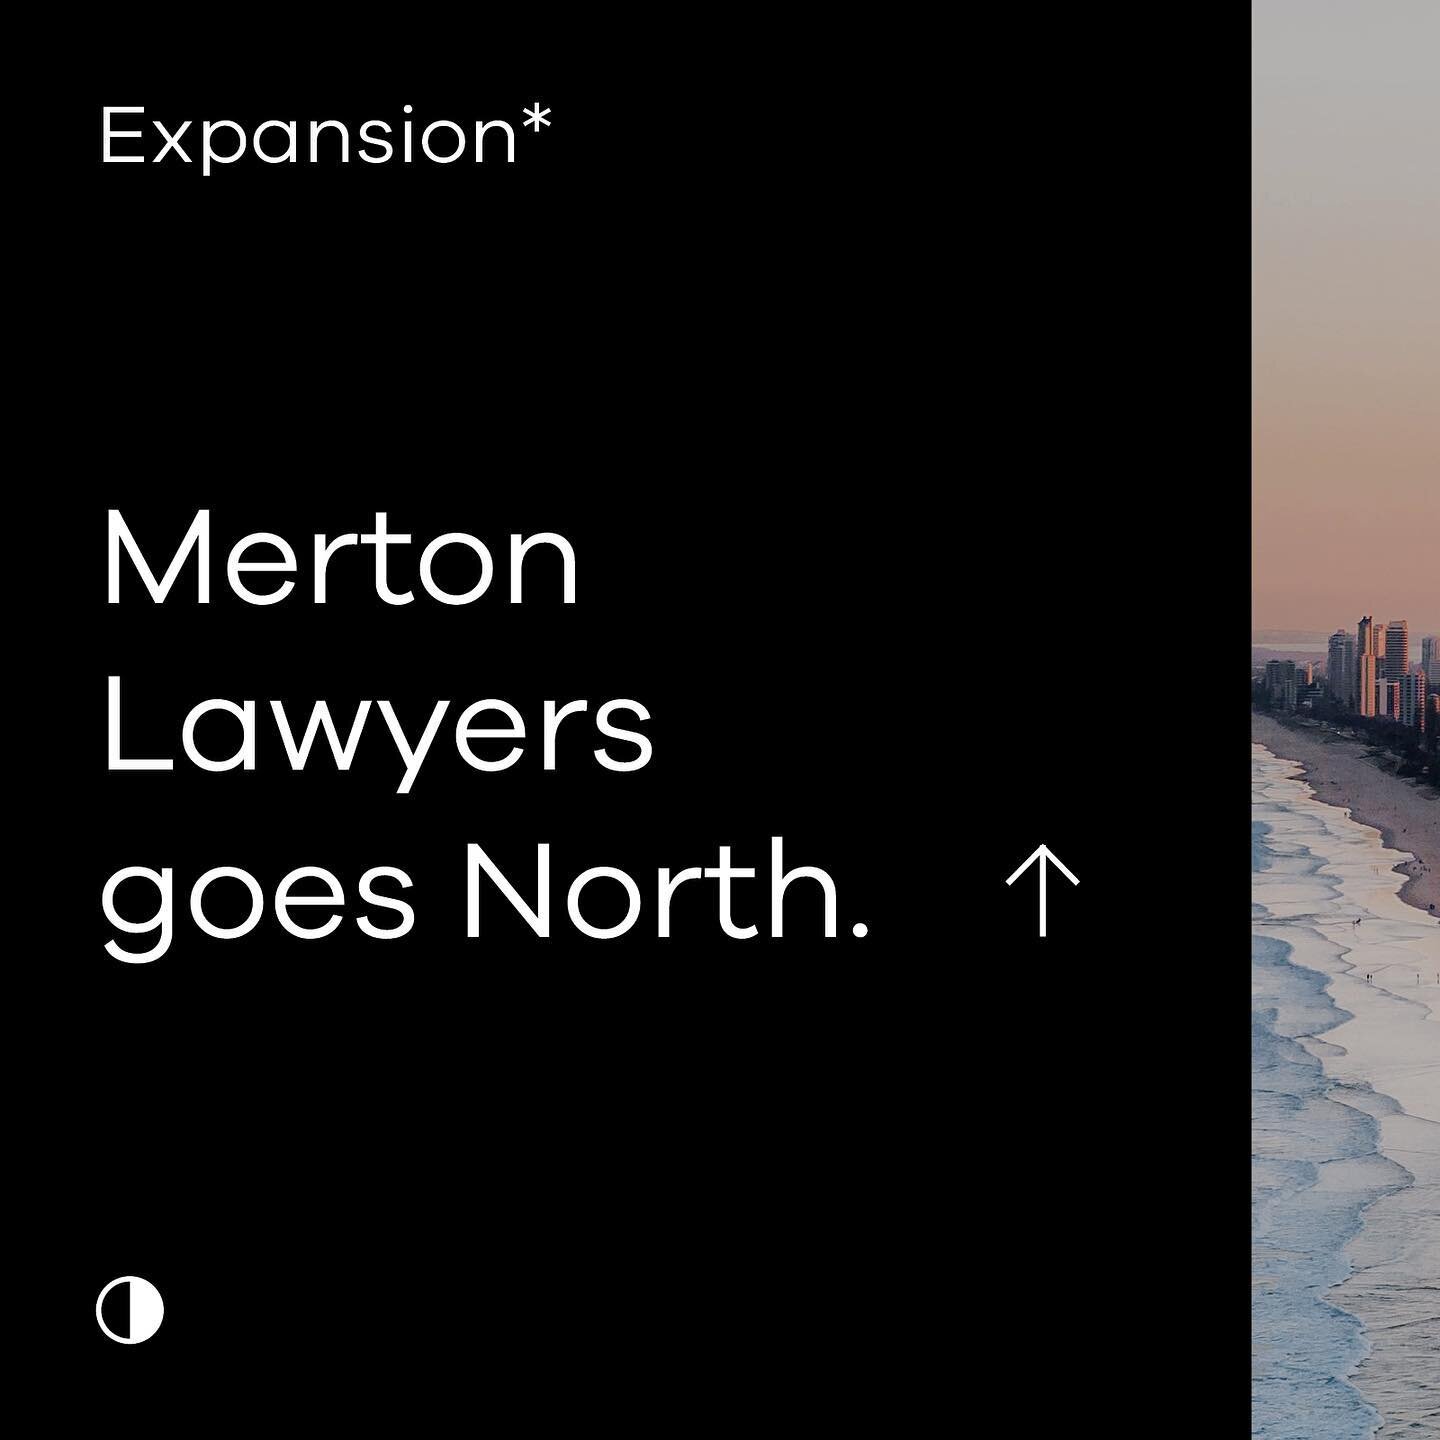 Exciting news about Merton Lawyers&rsquo; continued expansion up the Eastern Seaboard coming soon...